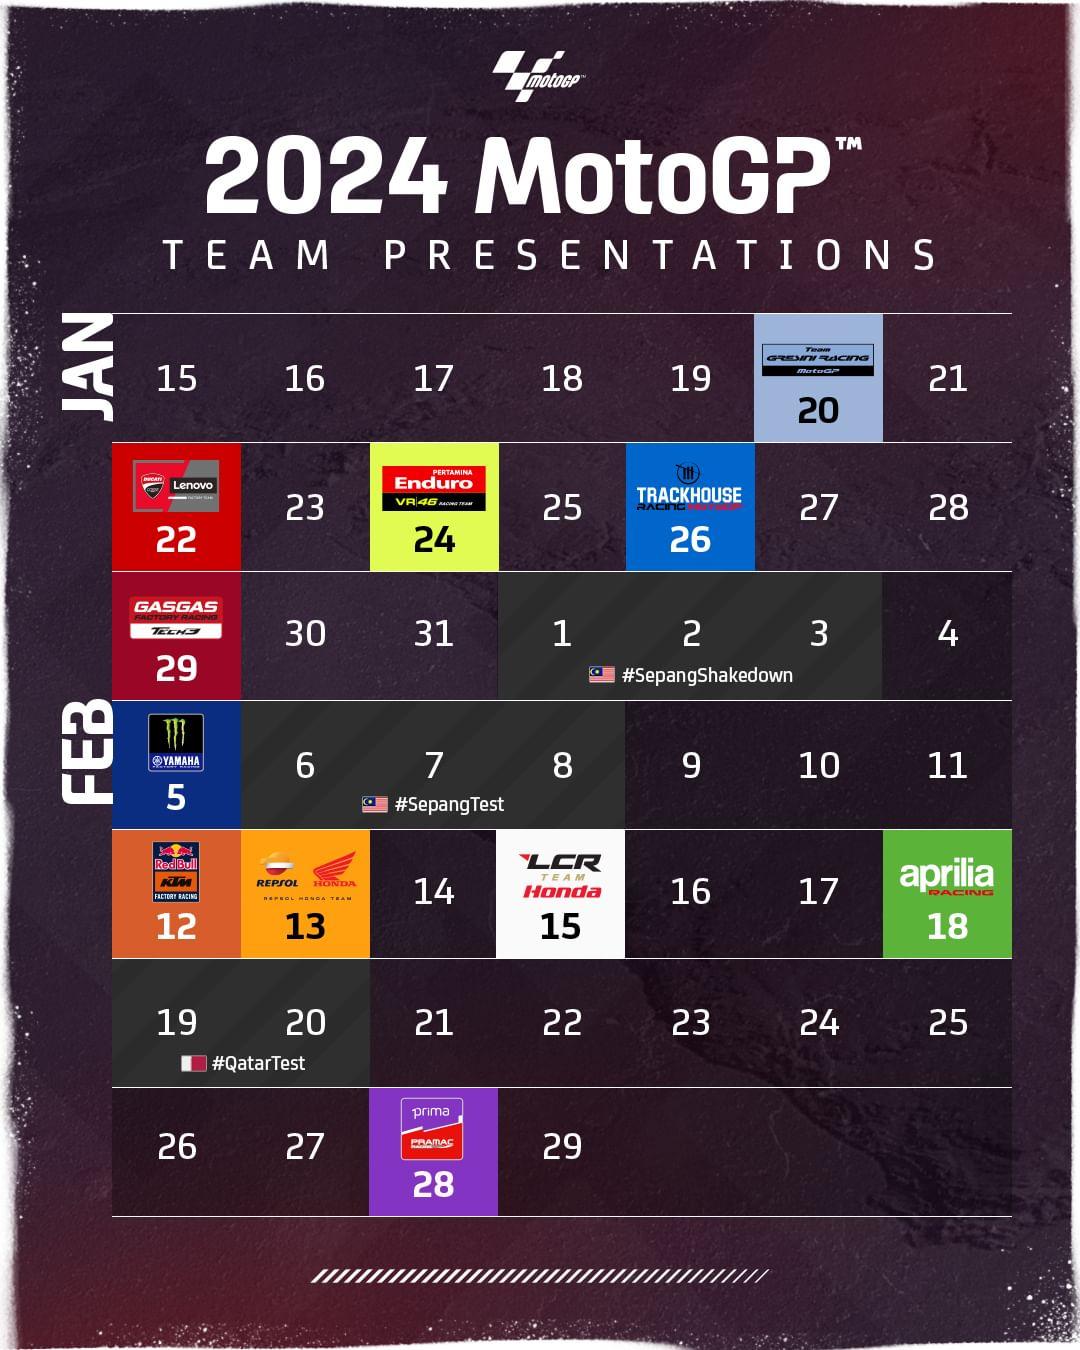 #MotoGP2024 is here! 🤩 Save the dates for the most awaited presentations! 🗓 

#MotoGP 🏁